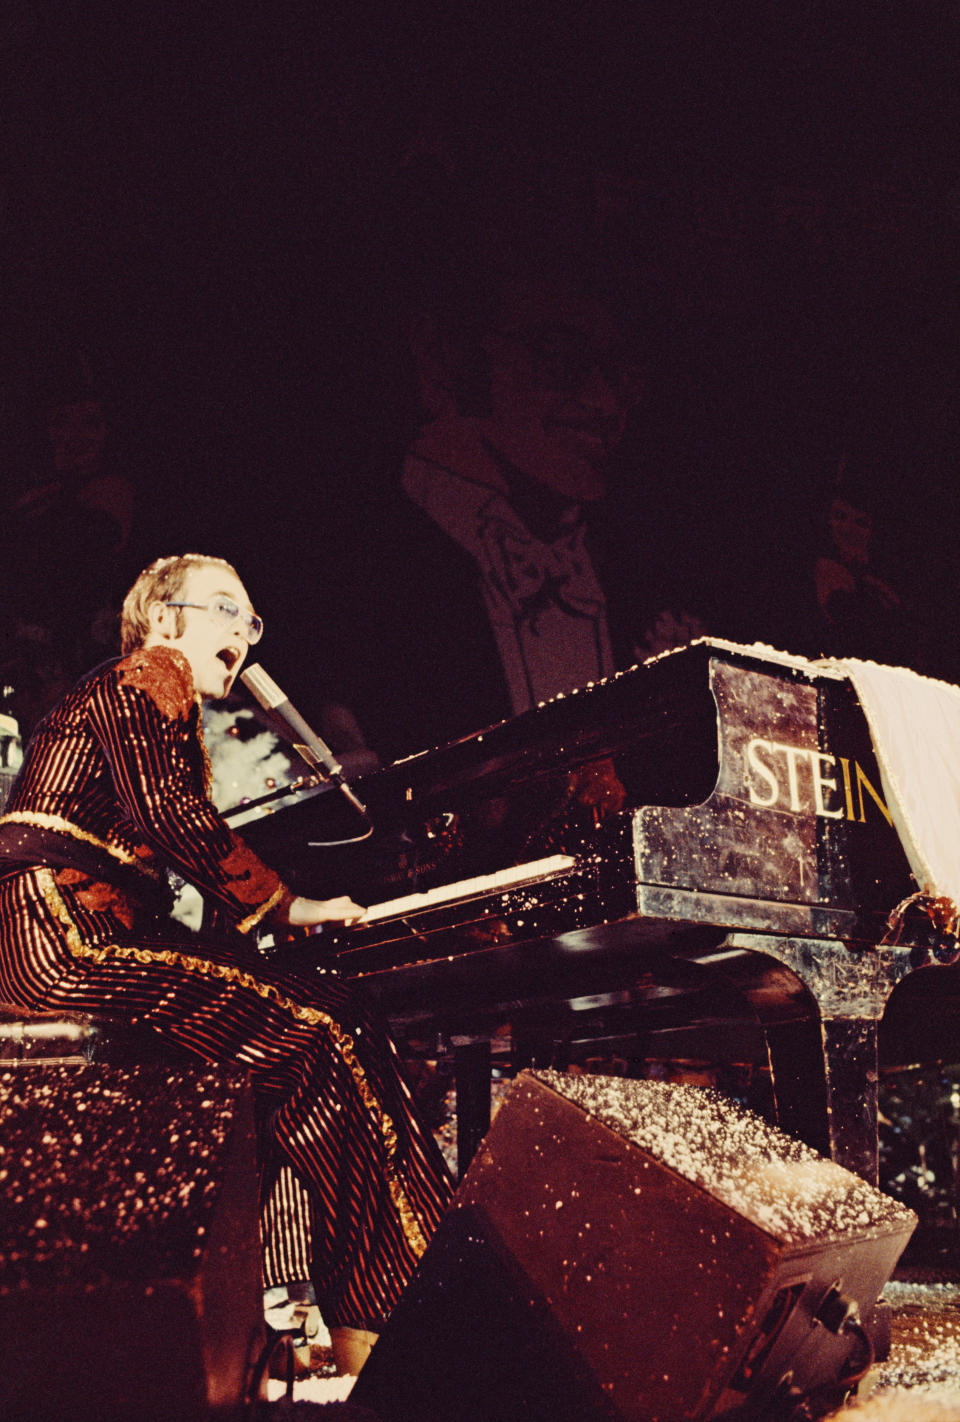 British singer Elton John performs on stage during his Christmas show at the Hammersmith Odeon in London, UK, 21st December 1973. (Photo by Michael Putland/Getty Images)